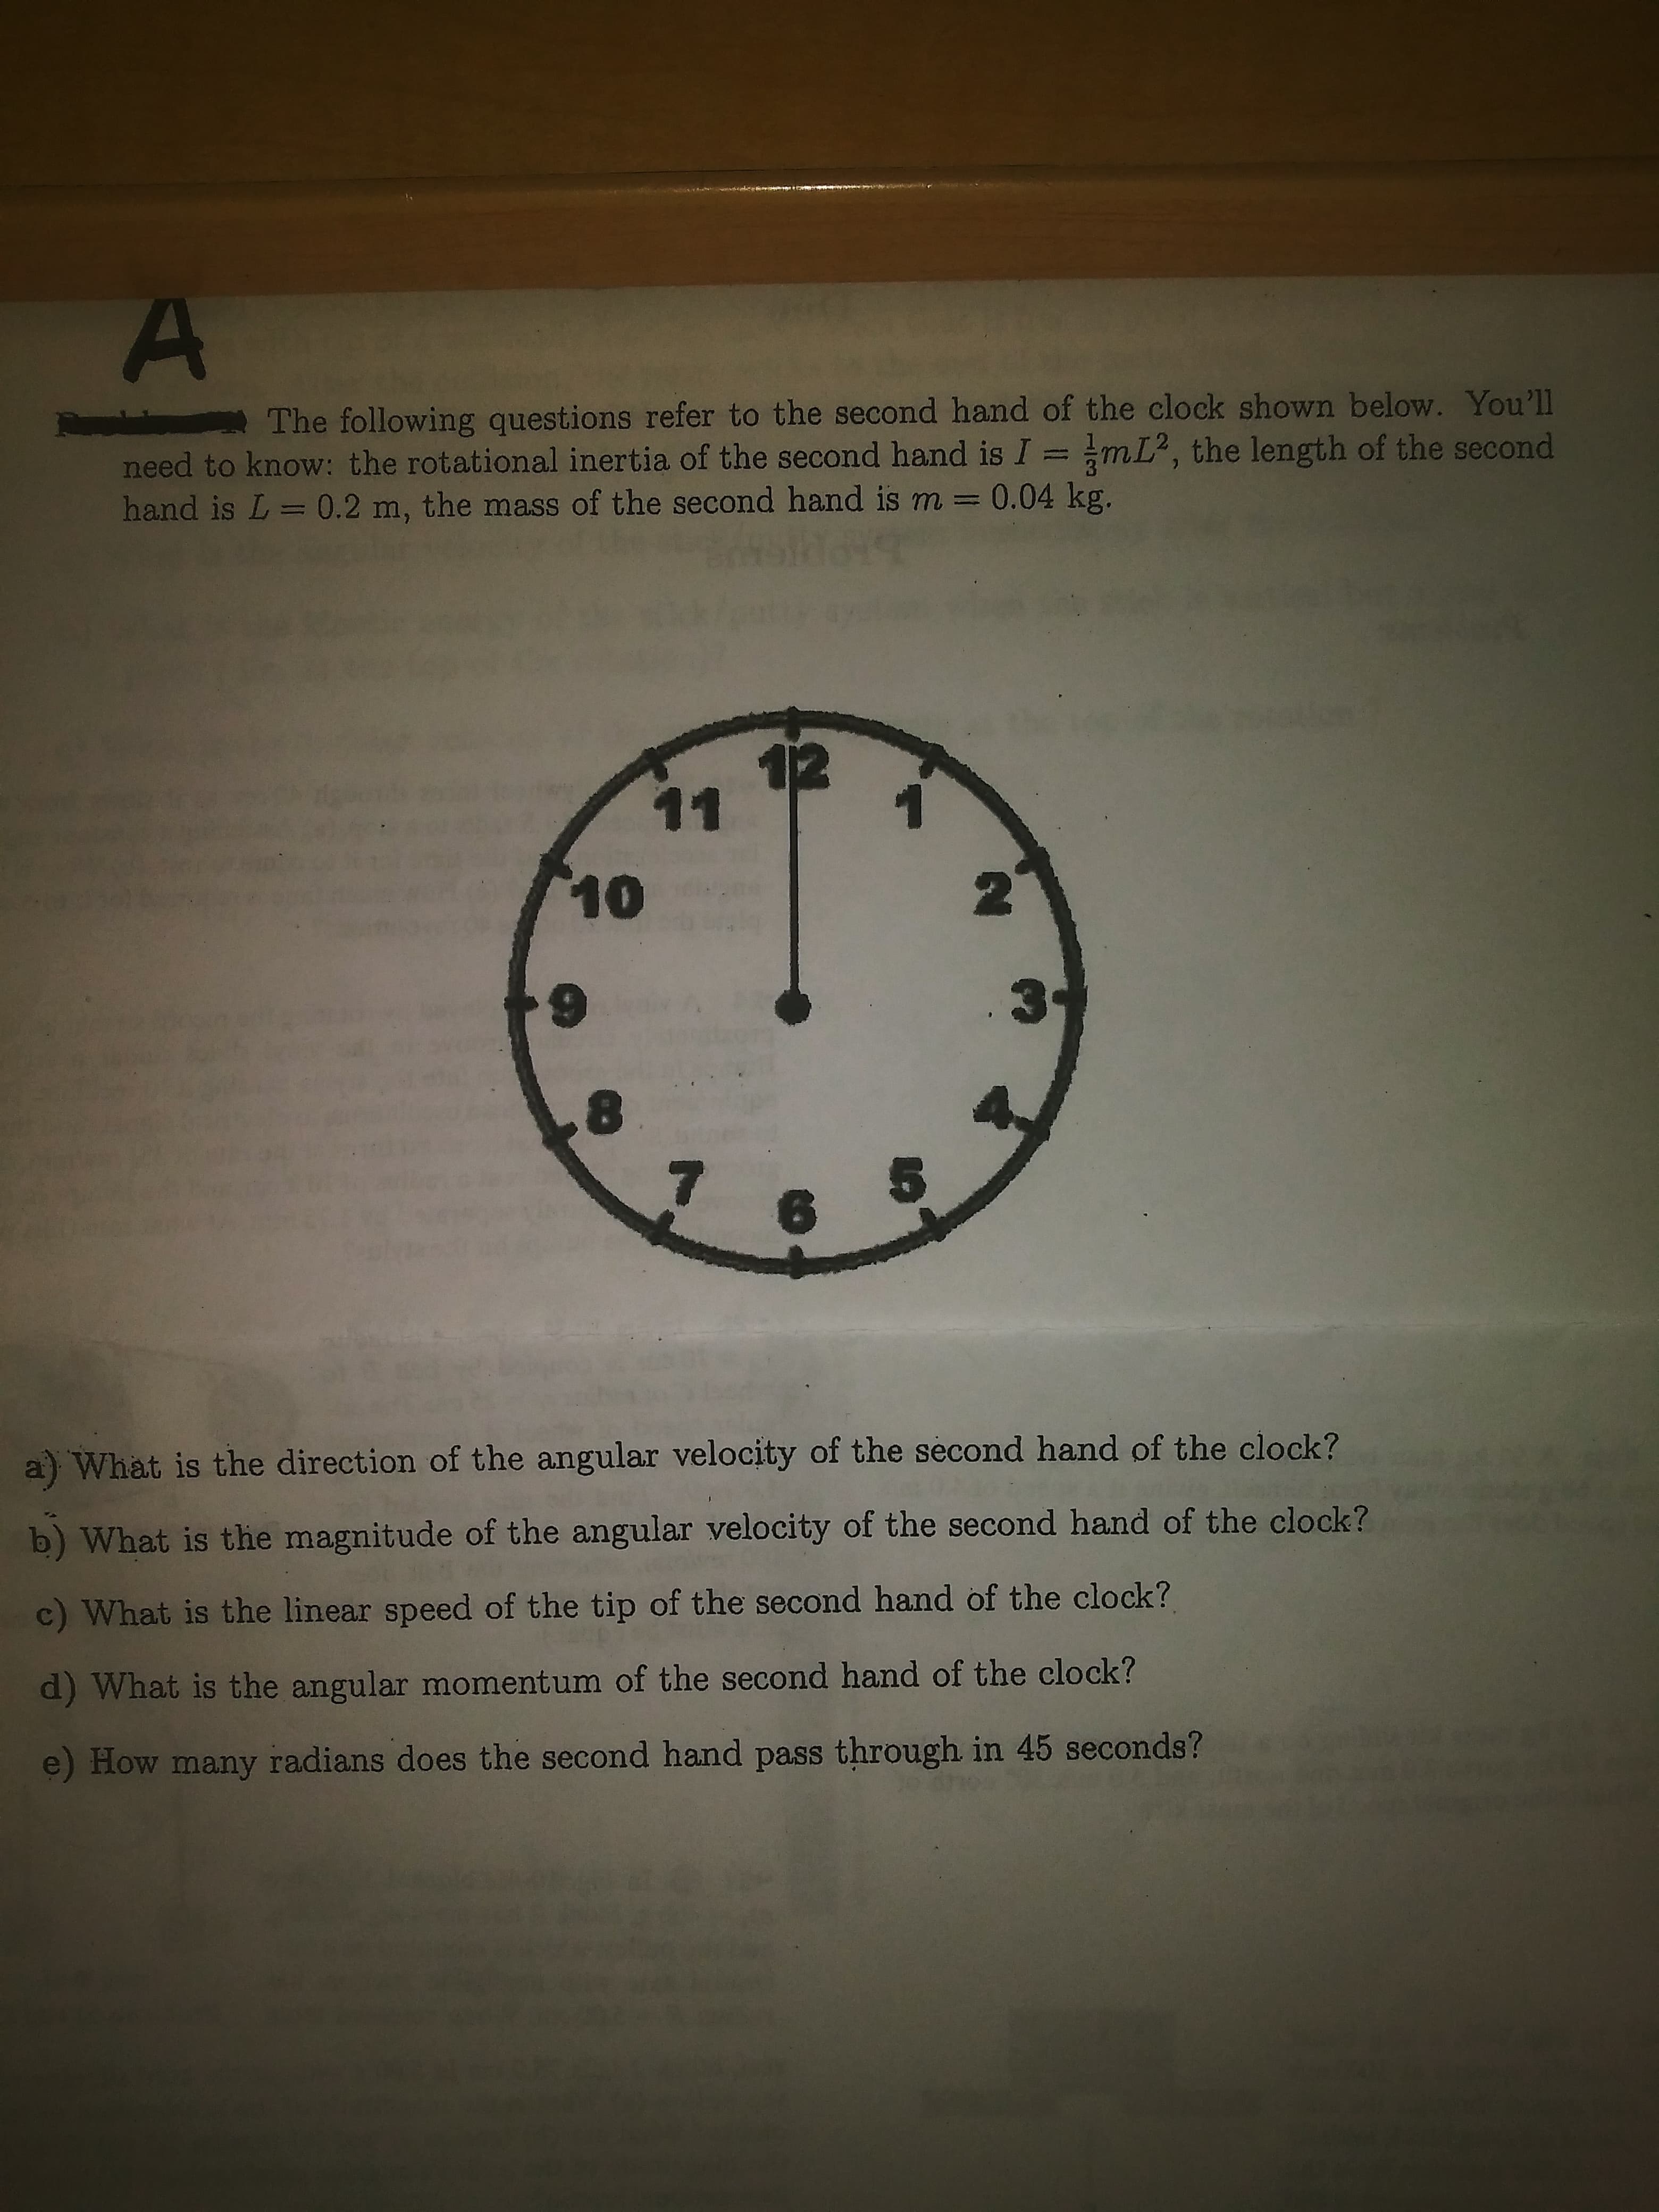 The following questions refer to the second hand of the clock shown below. You'll
need to know: the rotational inertia of the second hand is I = mL², the length of the second
hand is L= 0.2 m, the mass of the second hand is m = 0.04 kg.
6.
5.
a) What is the direction of the angular velocity of the second hand of the clock?
b) What is the magnitude of the angular velocity of the second hand of the clock?
c) What is the linear speed of the tip of the second hand of the clock?
d) What is the angular momentum of the second hand of the clock?
e) How many radians does the second hand pass through in 45 seconds?
